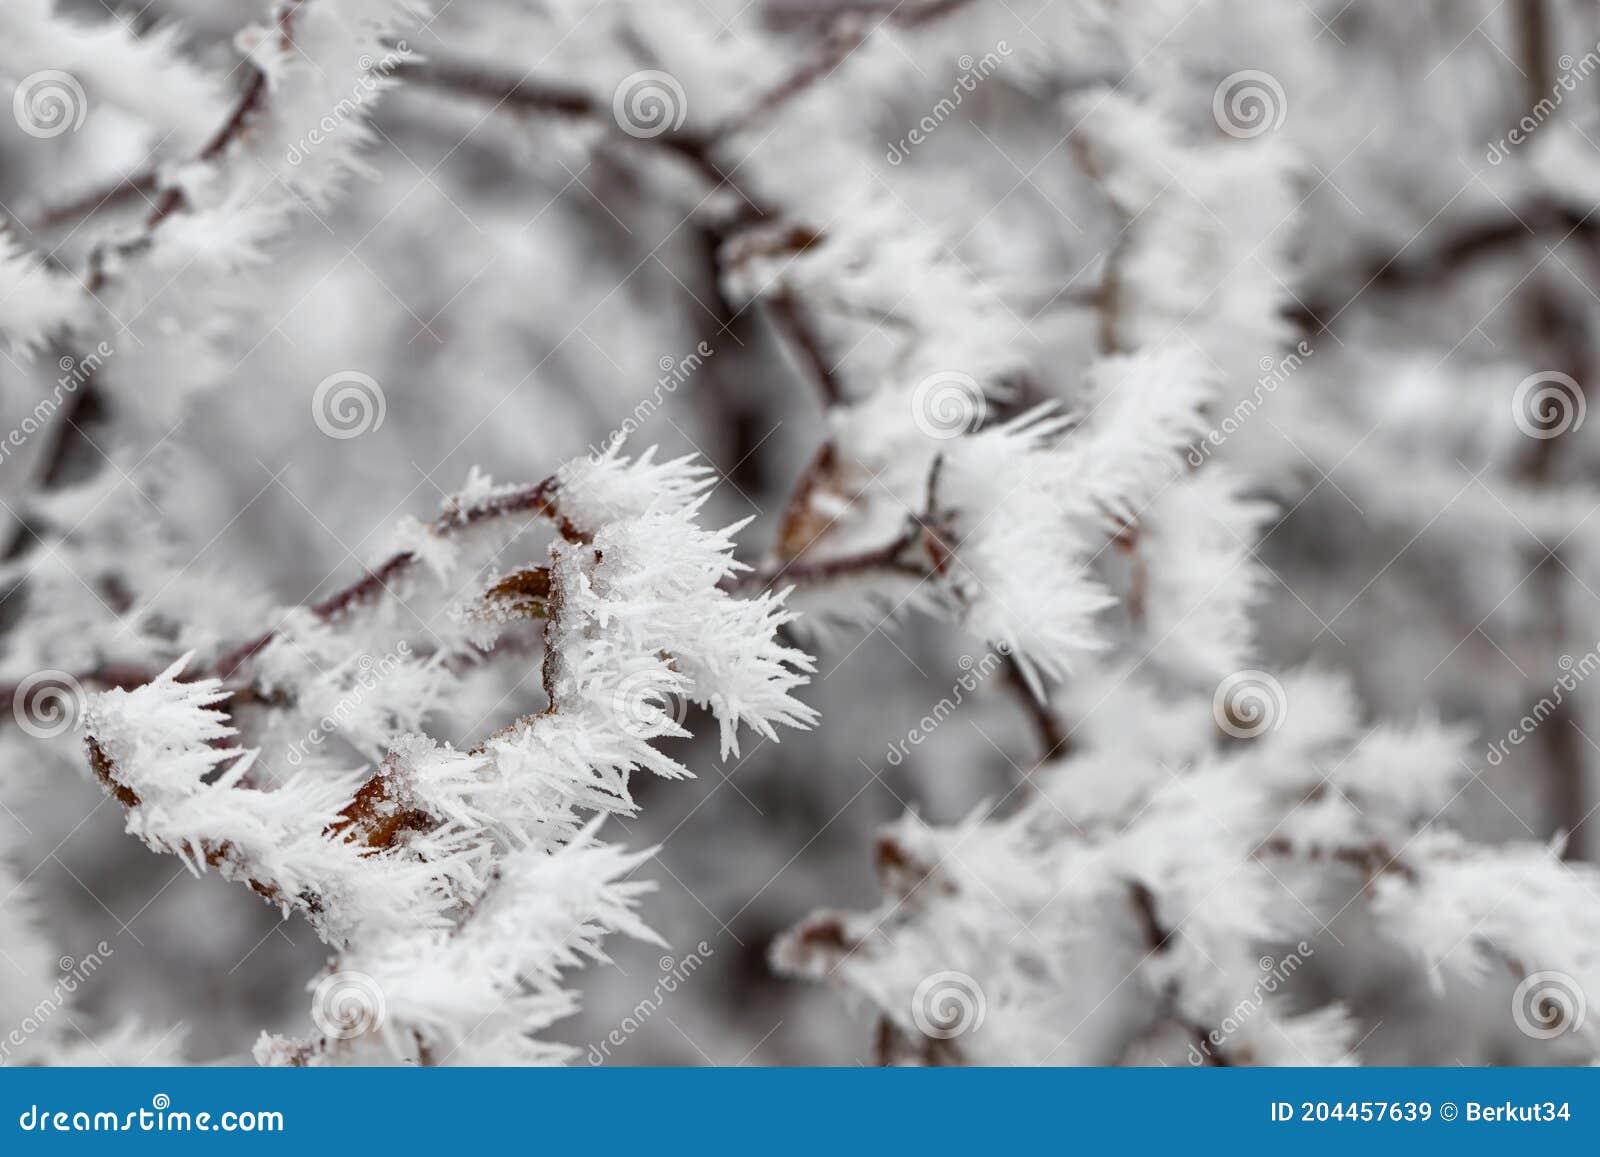 Long Ice Crystals on Frozen Tree Branches Stock Image - Image of ...